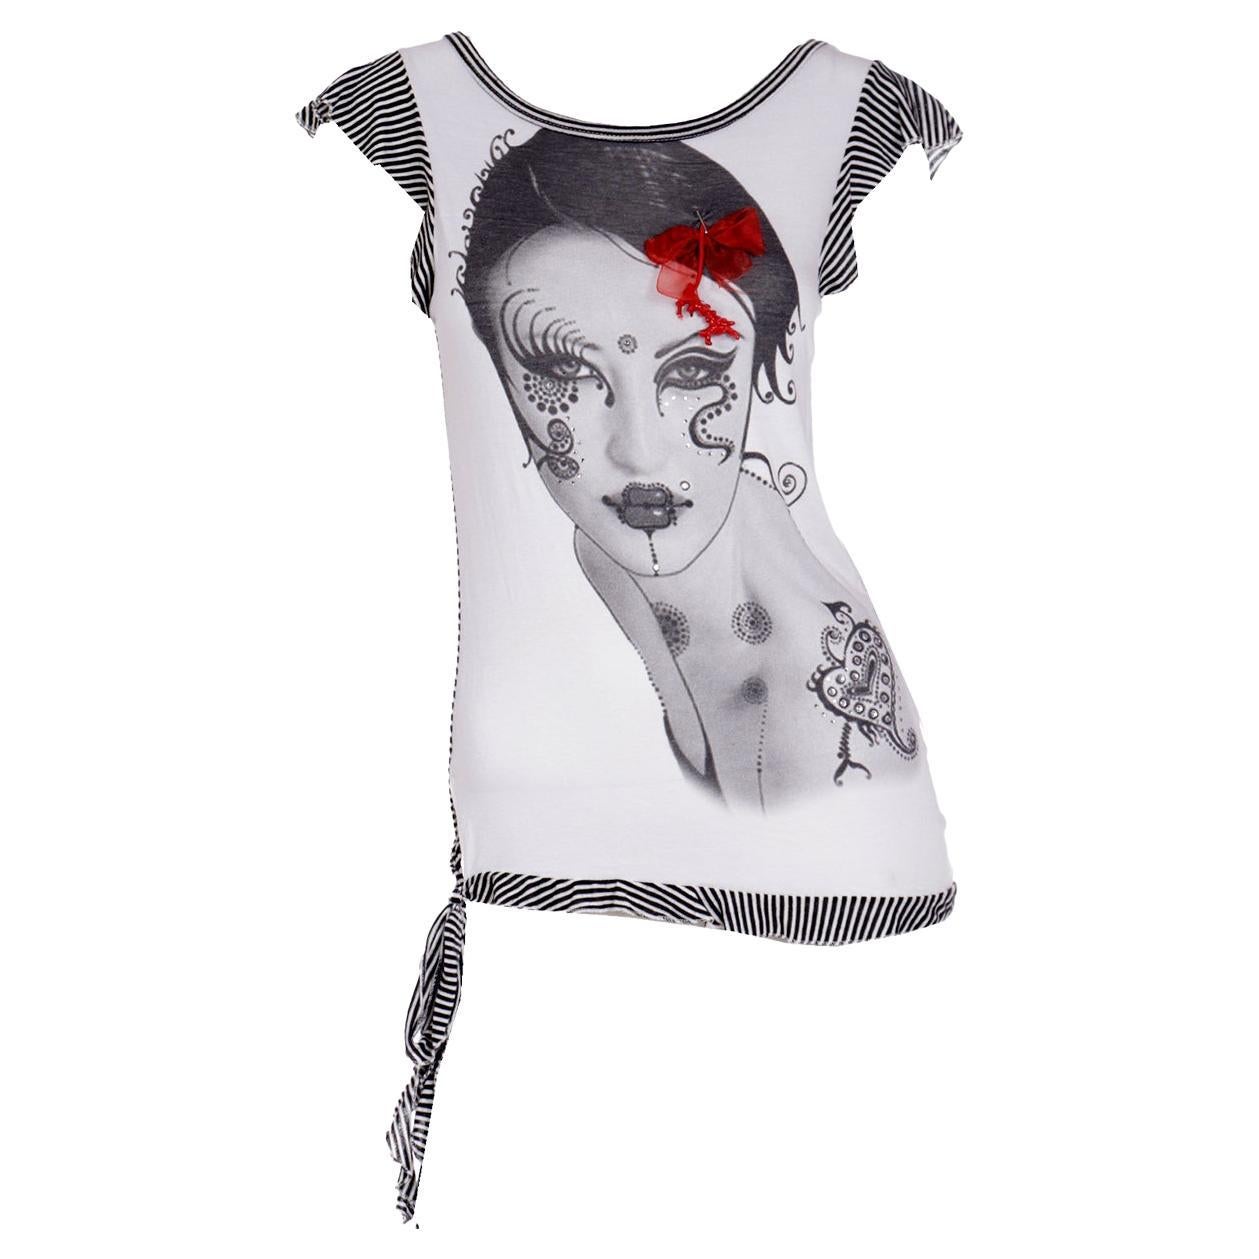 Gianfranco Ferre Black & White Vintage Novelty Top W Woman's Face & Rhinestones For Sale